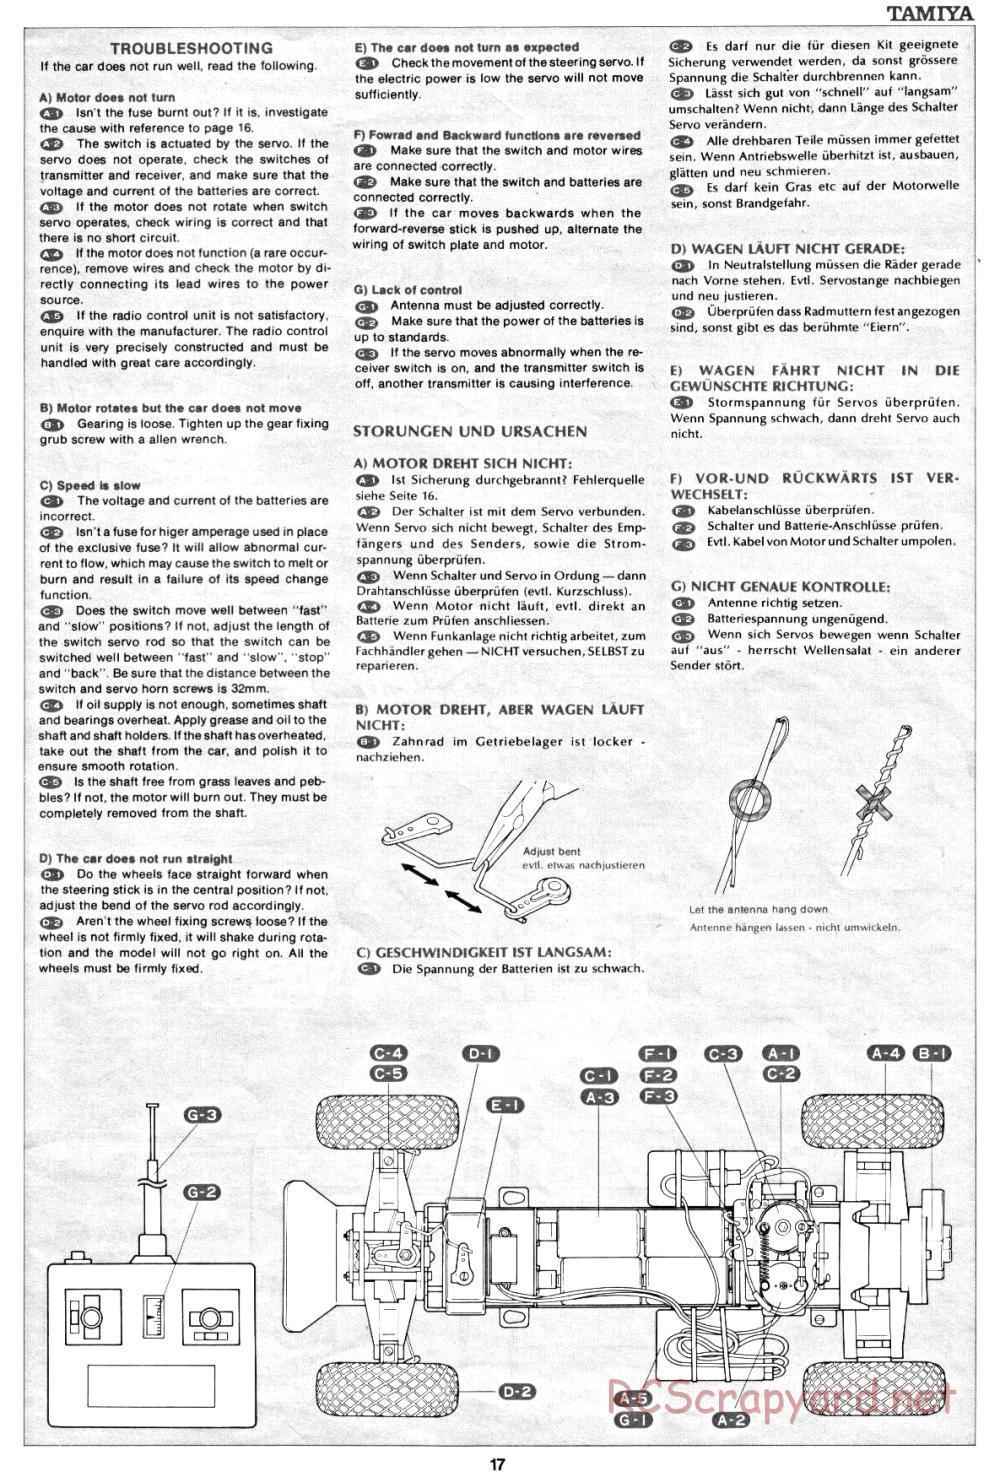 Tamiya - XR311 Combat Support Vehicle (1977) Chassis - Manual - Page 17